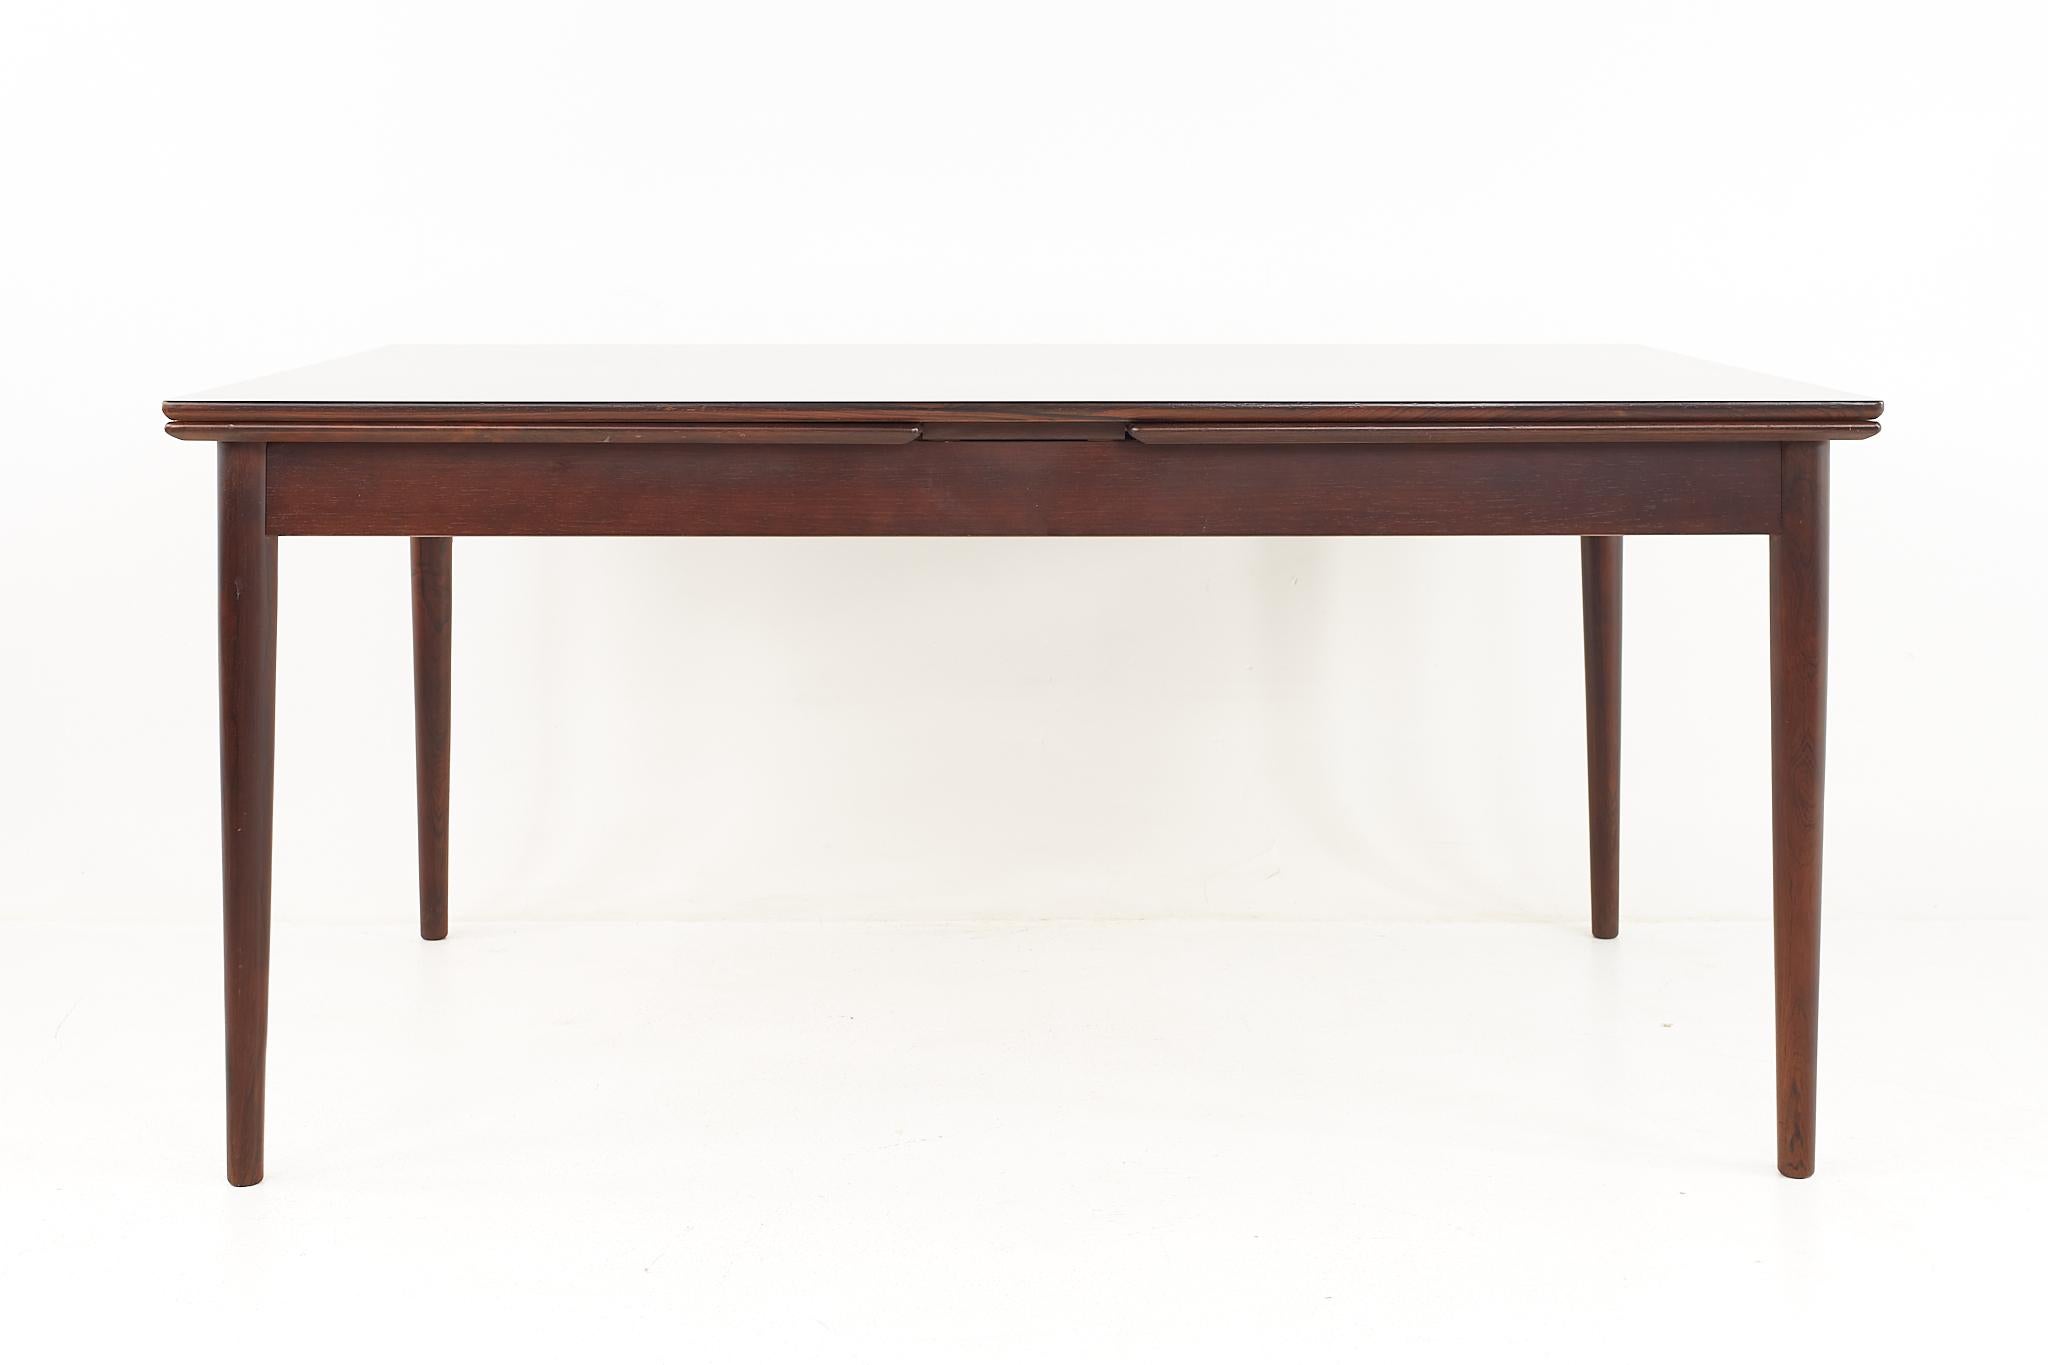 Restored Hornslet Danish mid century rosewood hidden leaf dining table

This table has been restored and is ready to ship.

Table measures: 62.5 wide x 39.5 deep x 29 inches high; each leaf is 27.5 inches wide, making a maximum table width of